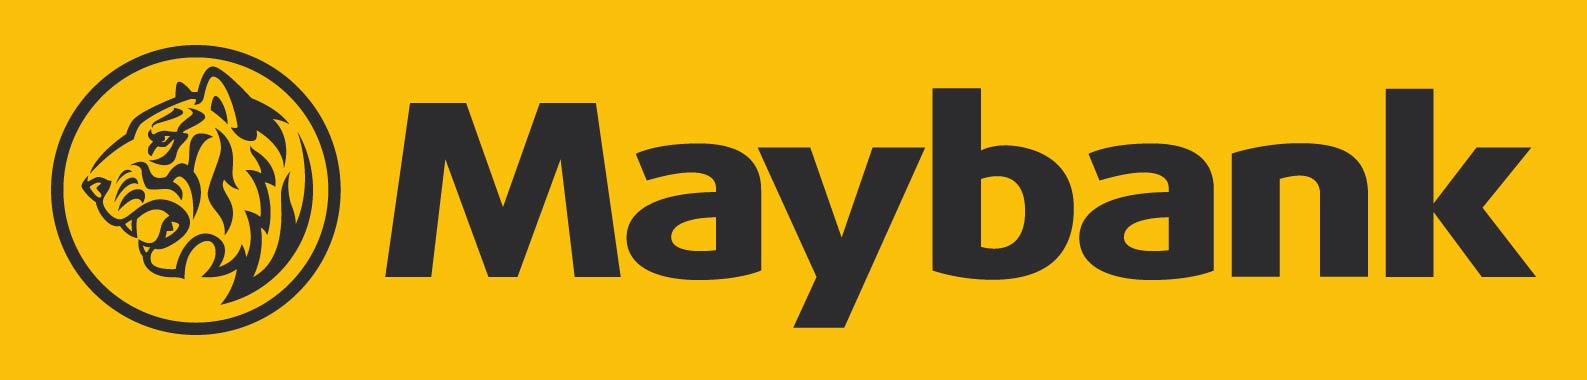 download Maybank new logo vector in eps ai format